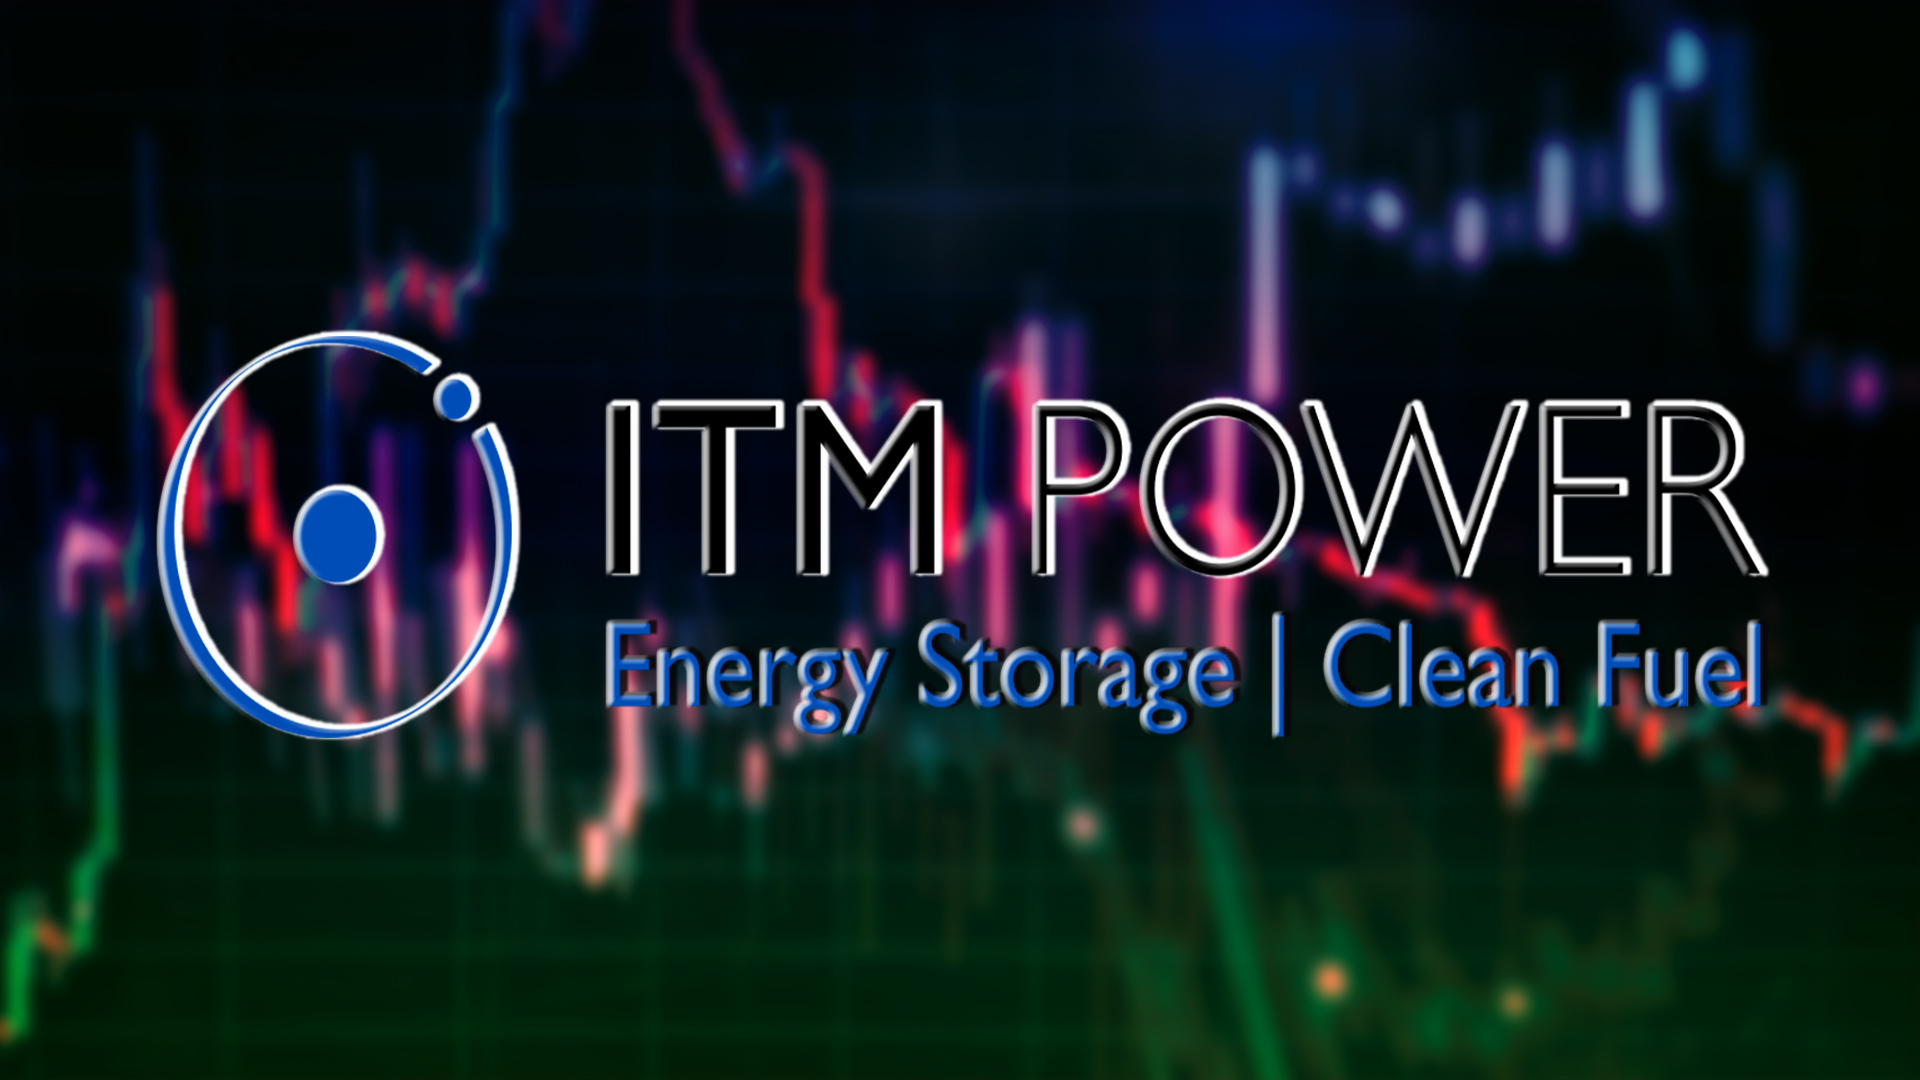 ITM POWER stock: ITM Breaks a Major Resistance, What is Next?